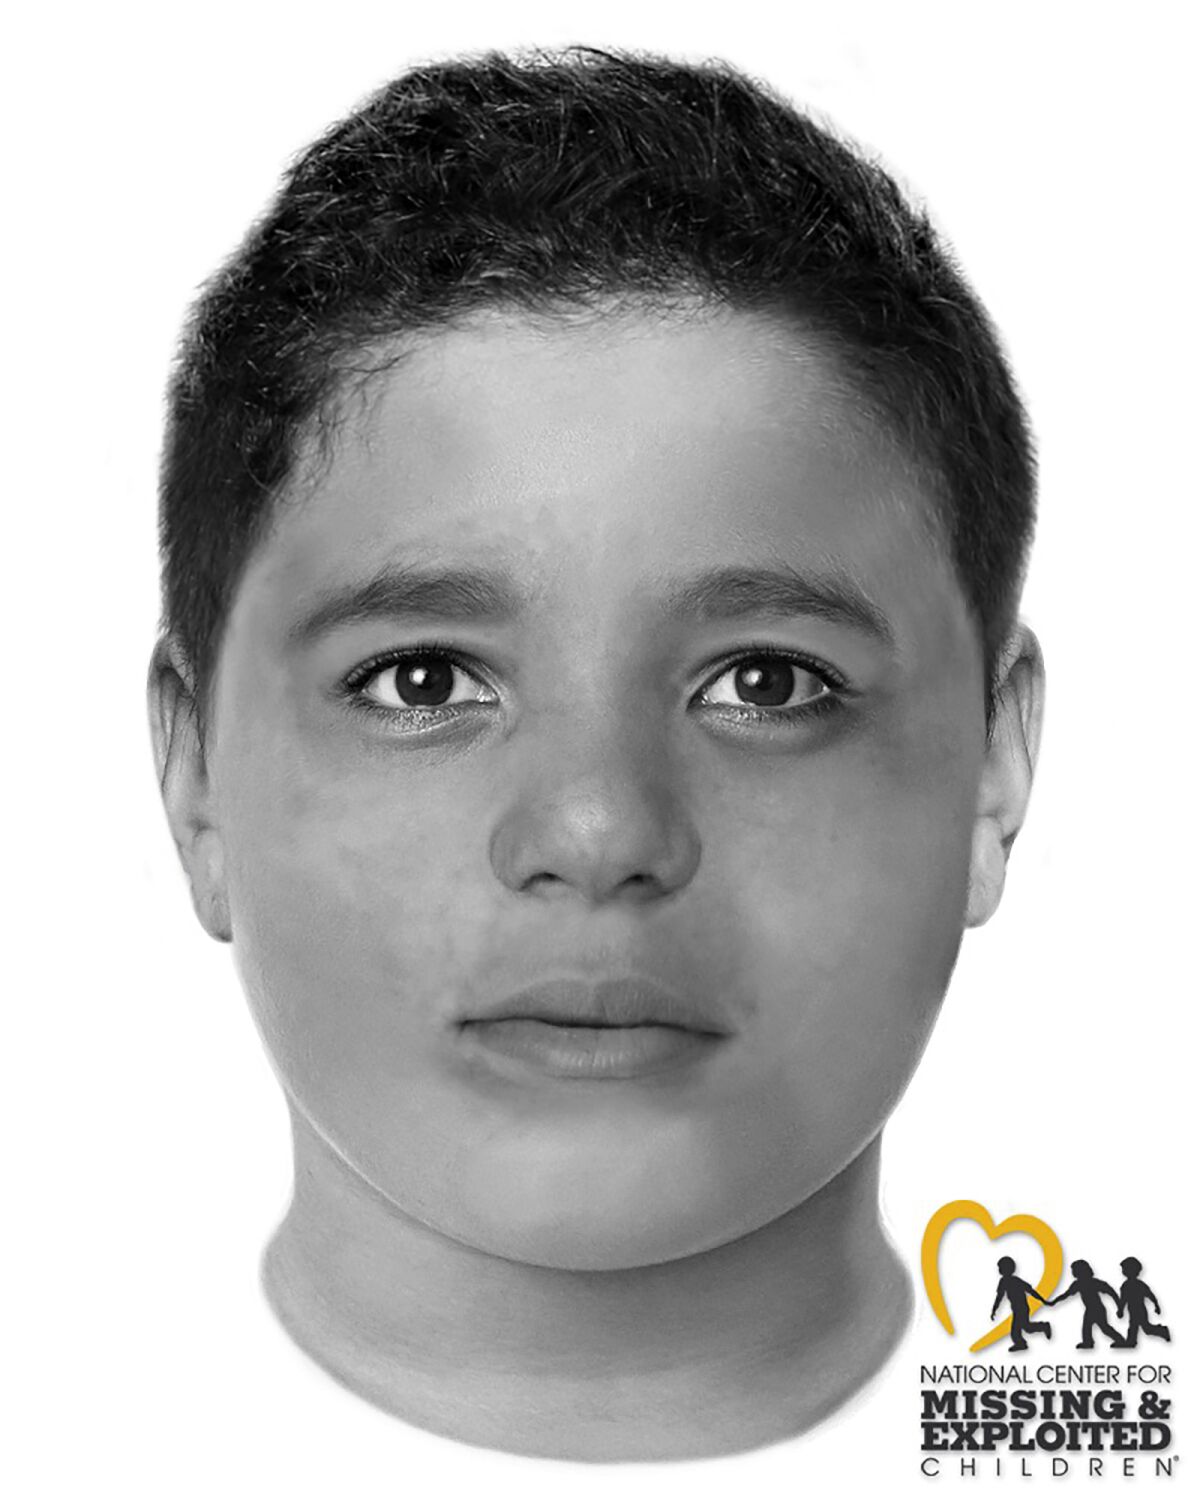 This image provided by the Las Vegas Metropolitan Police Department and created by the National Center for Missing and Exploited Children depicts a slain boy believed to be between the ages of 8 and 12 whose body was found Friday, May 28, 2021, off a hiking trail between Las Vegas and rural Pahrump, Nevada. Police in Las Vegas are trying to identify the child. They say he was 4-foot-11, weighed about 125 pounds, and his death was clearly a homicide. (National Center for Missing and Exploited Children/Las Vegas Metropolitan Police Department via AP)